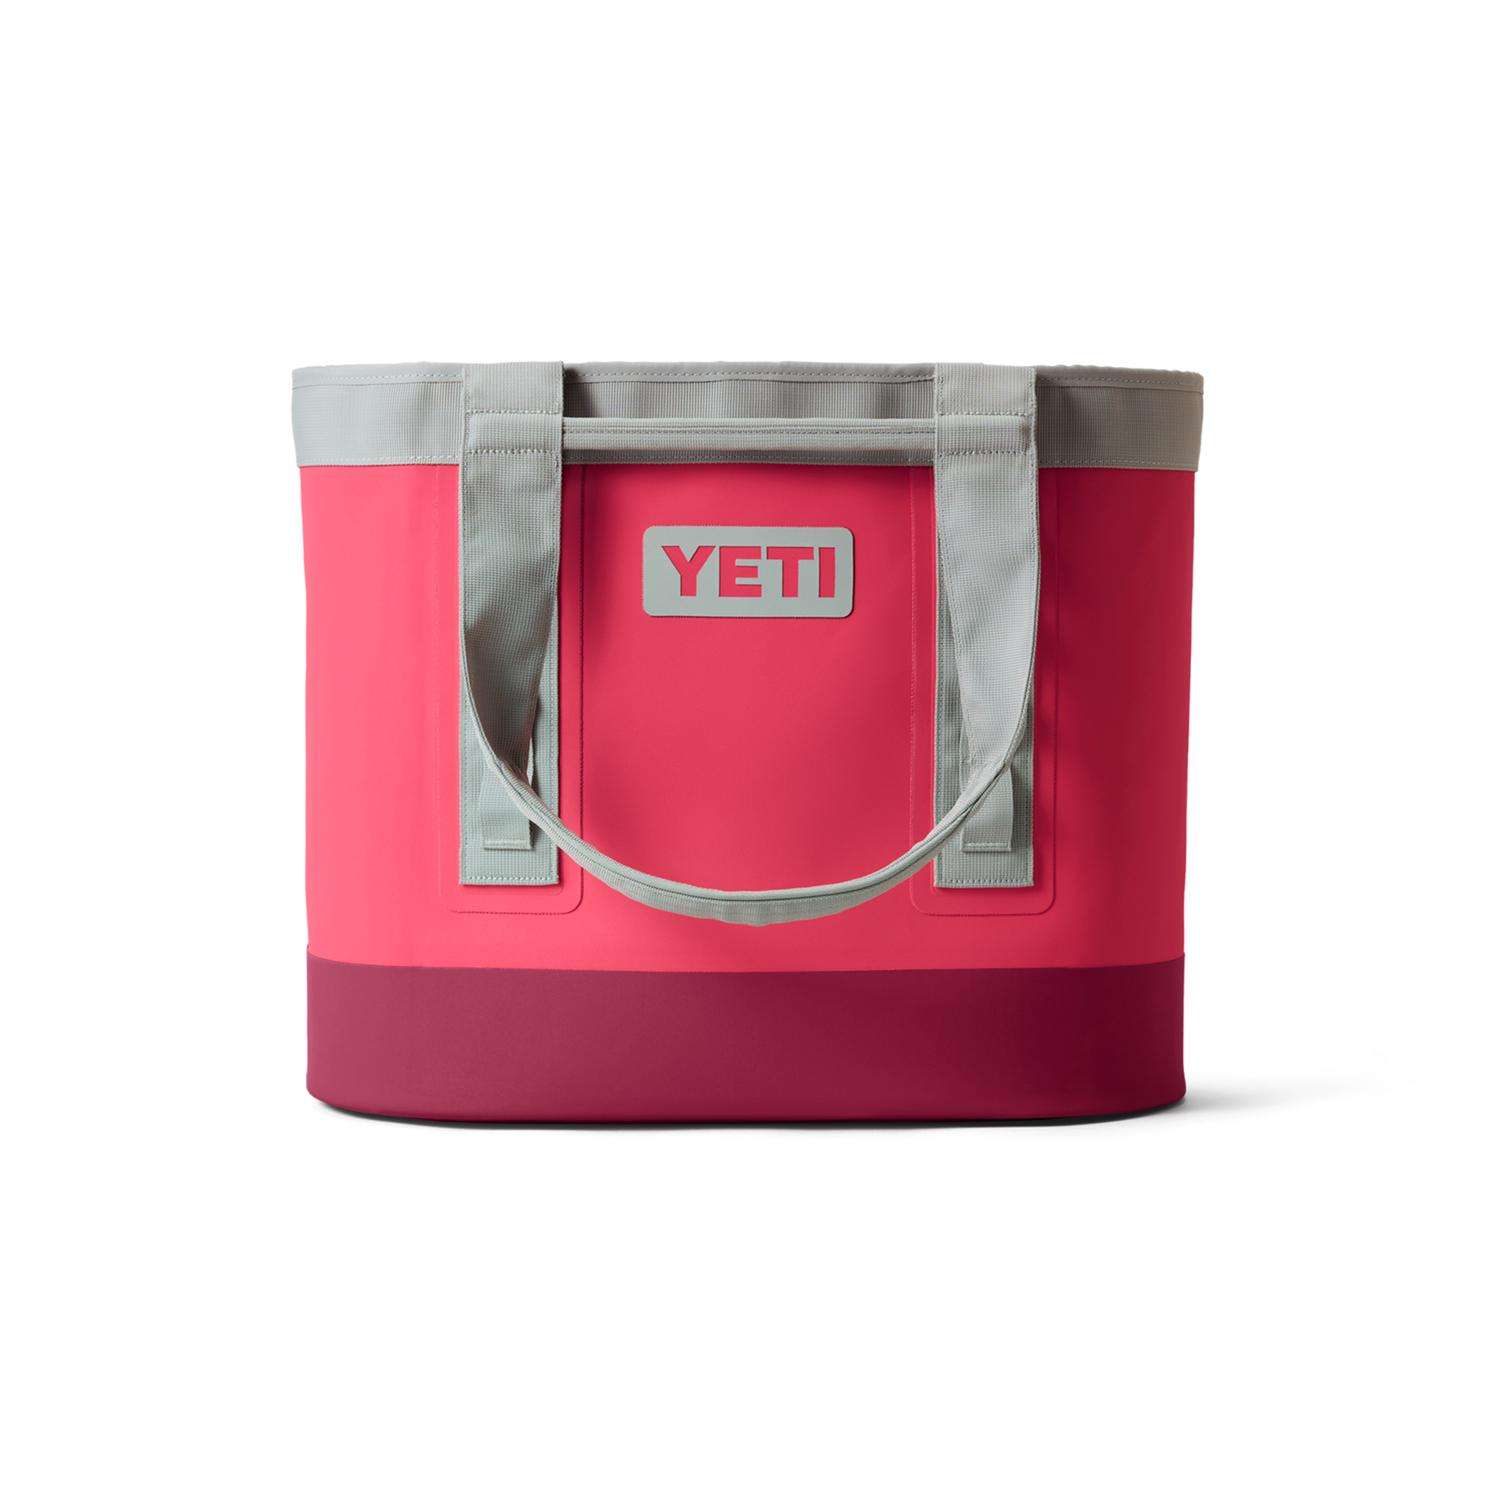 Yeti Camino Carryall all-purpose bag is great for everyday use and